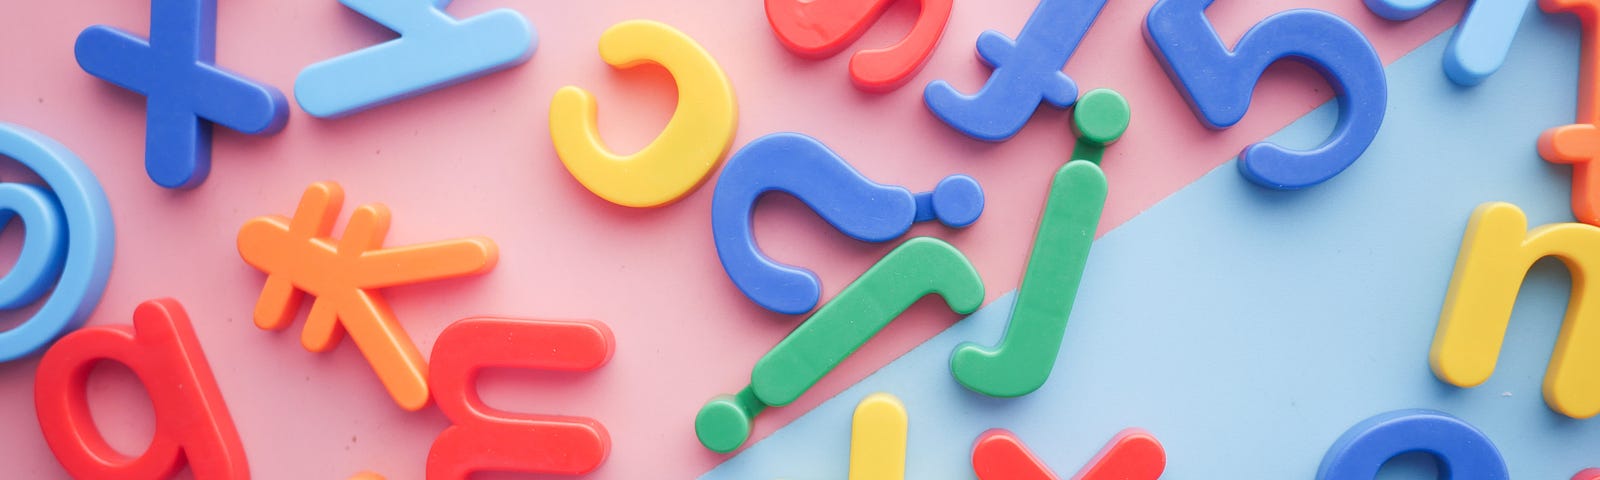 Colourful toy letters and symbols.